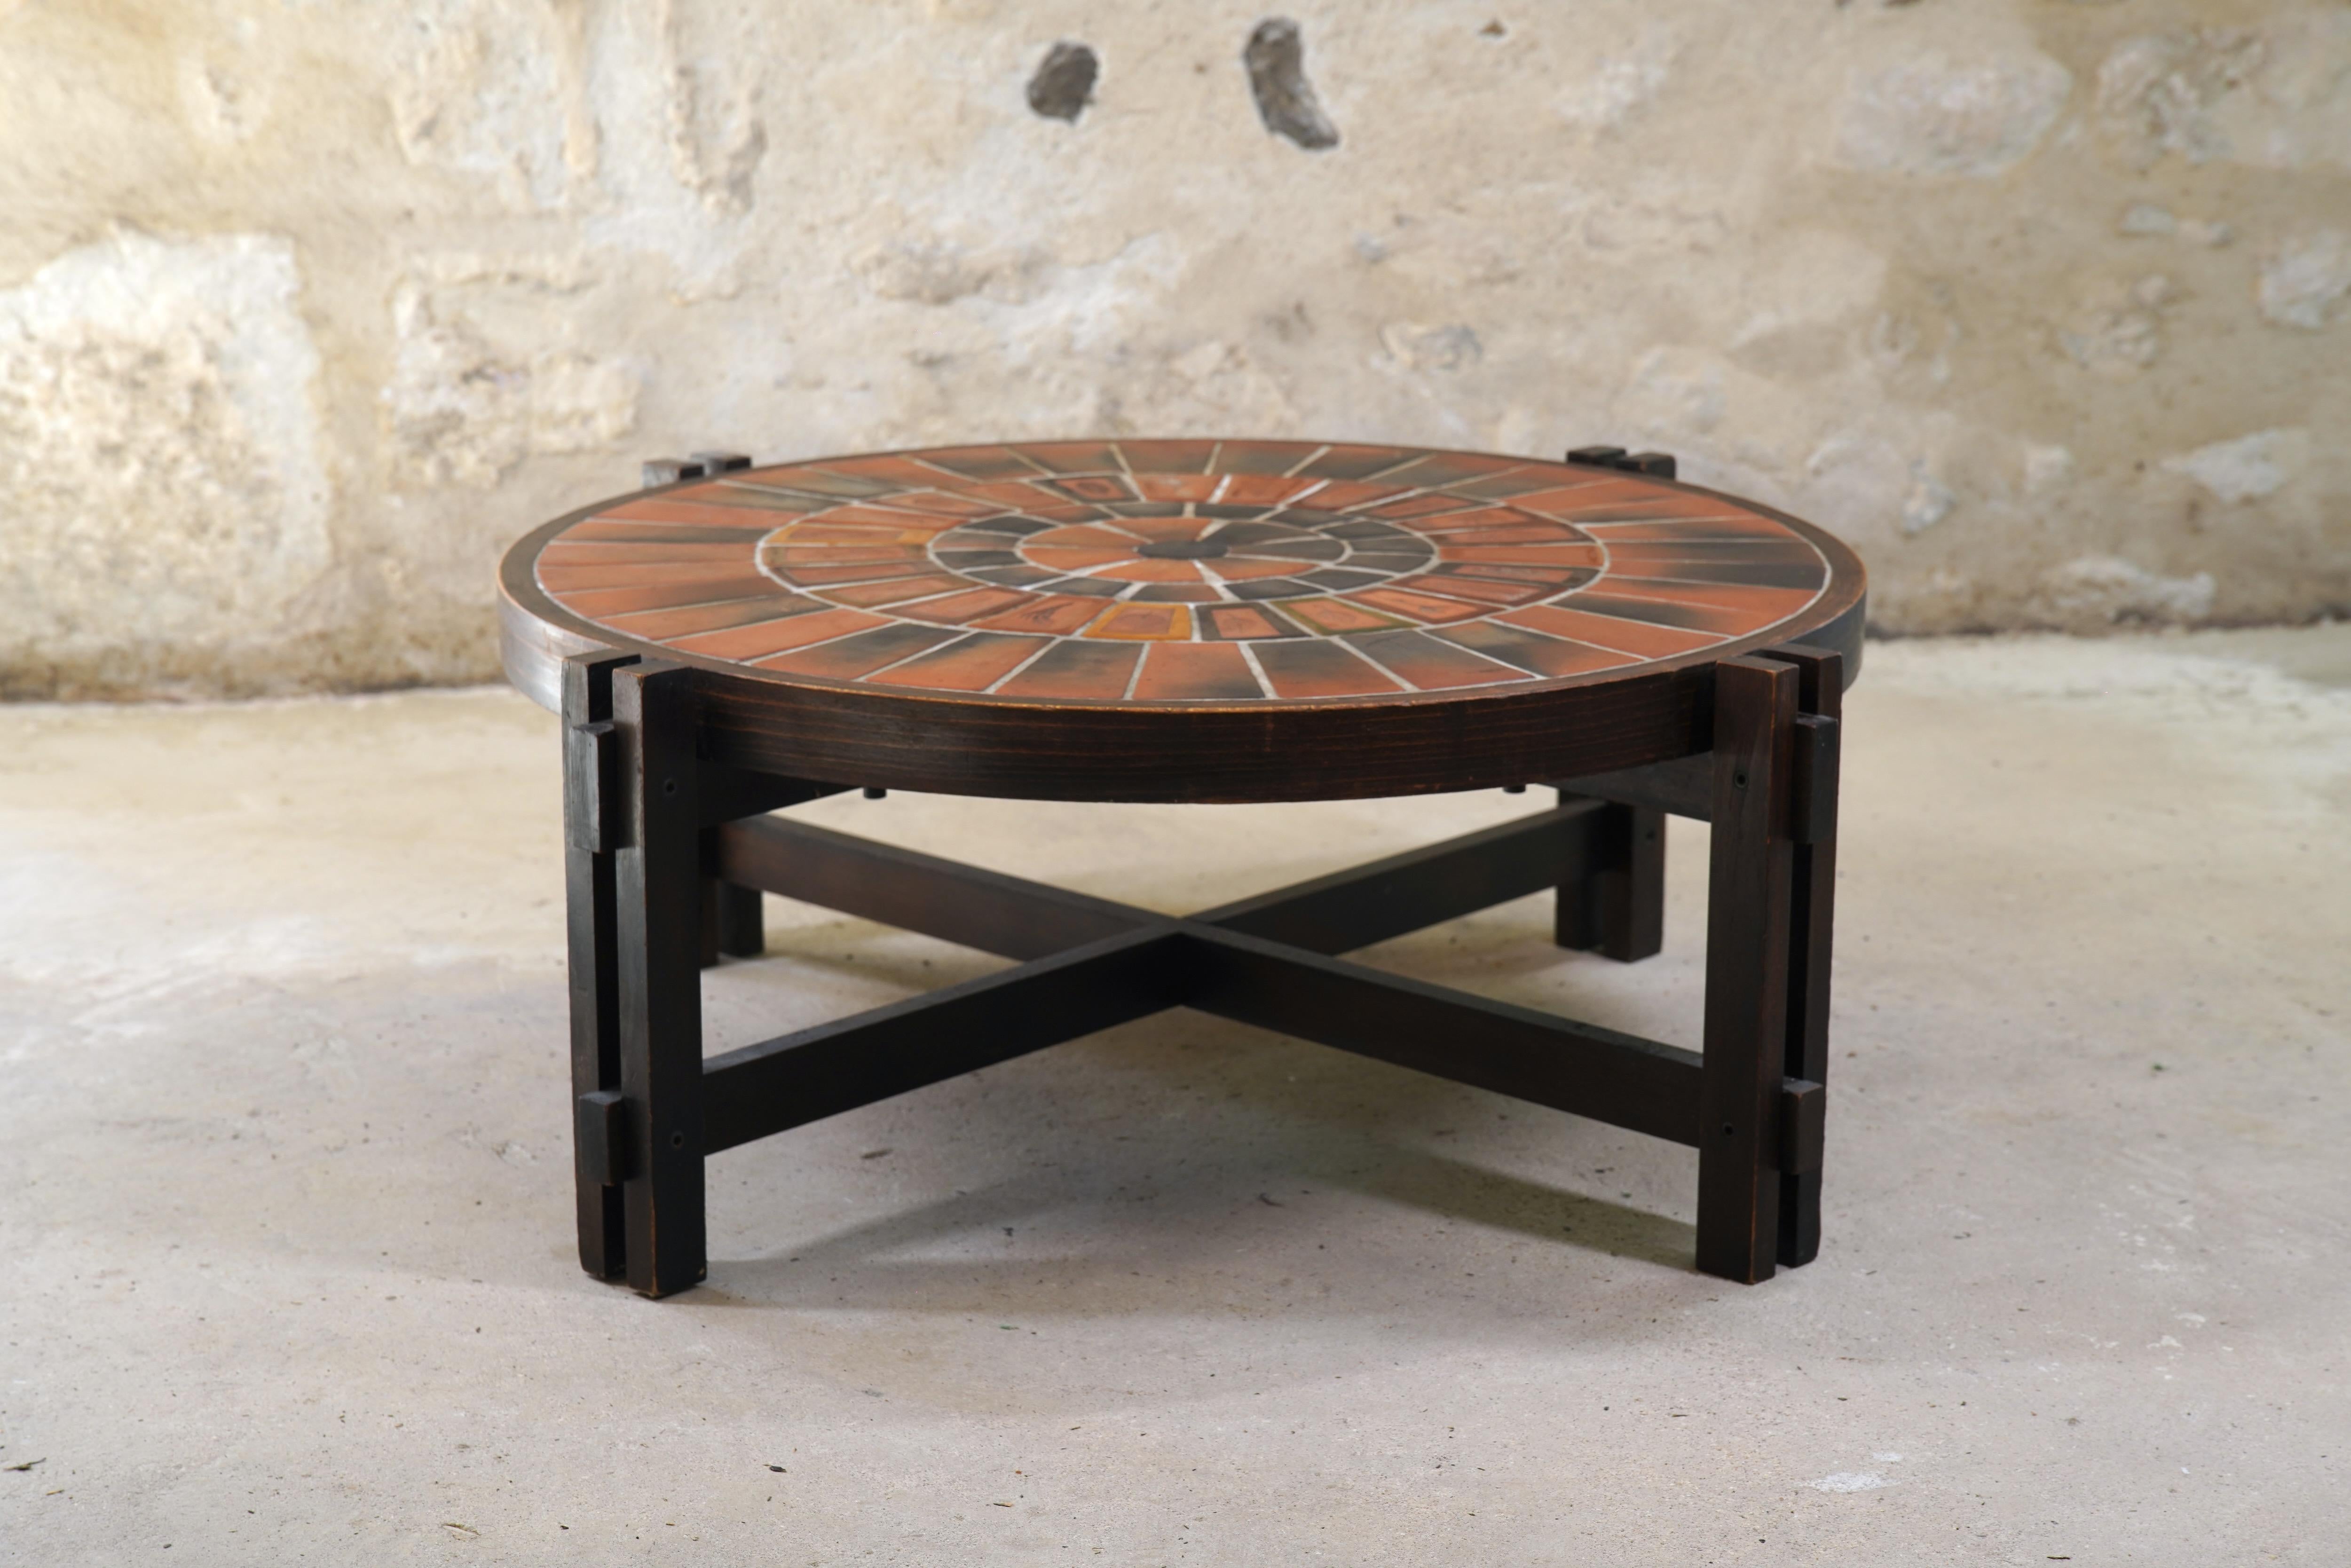 Wonderful Roger Capron ceramic coffee table with Garrigue tiles from France, circa 1960s.

The handcrafted Garrigue tiles were produced by a technique in which real leaves were pressed into the clay and, during firing, disintegrated, leaving a